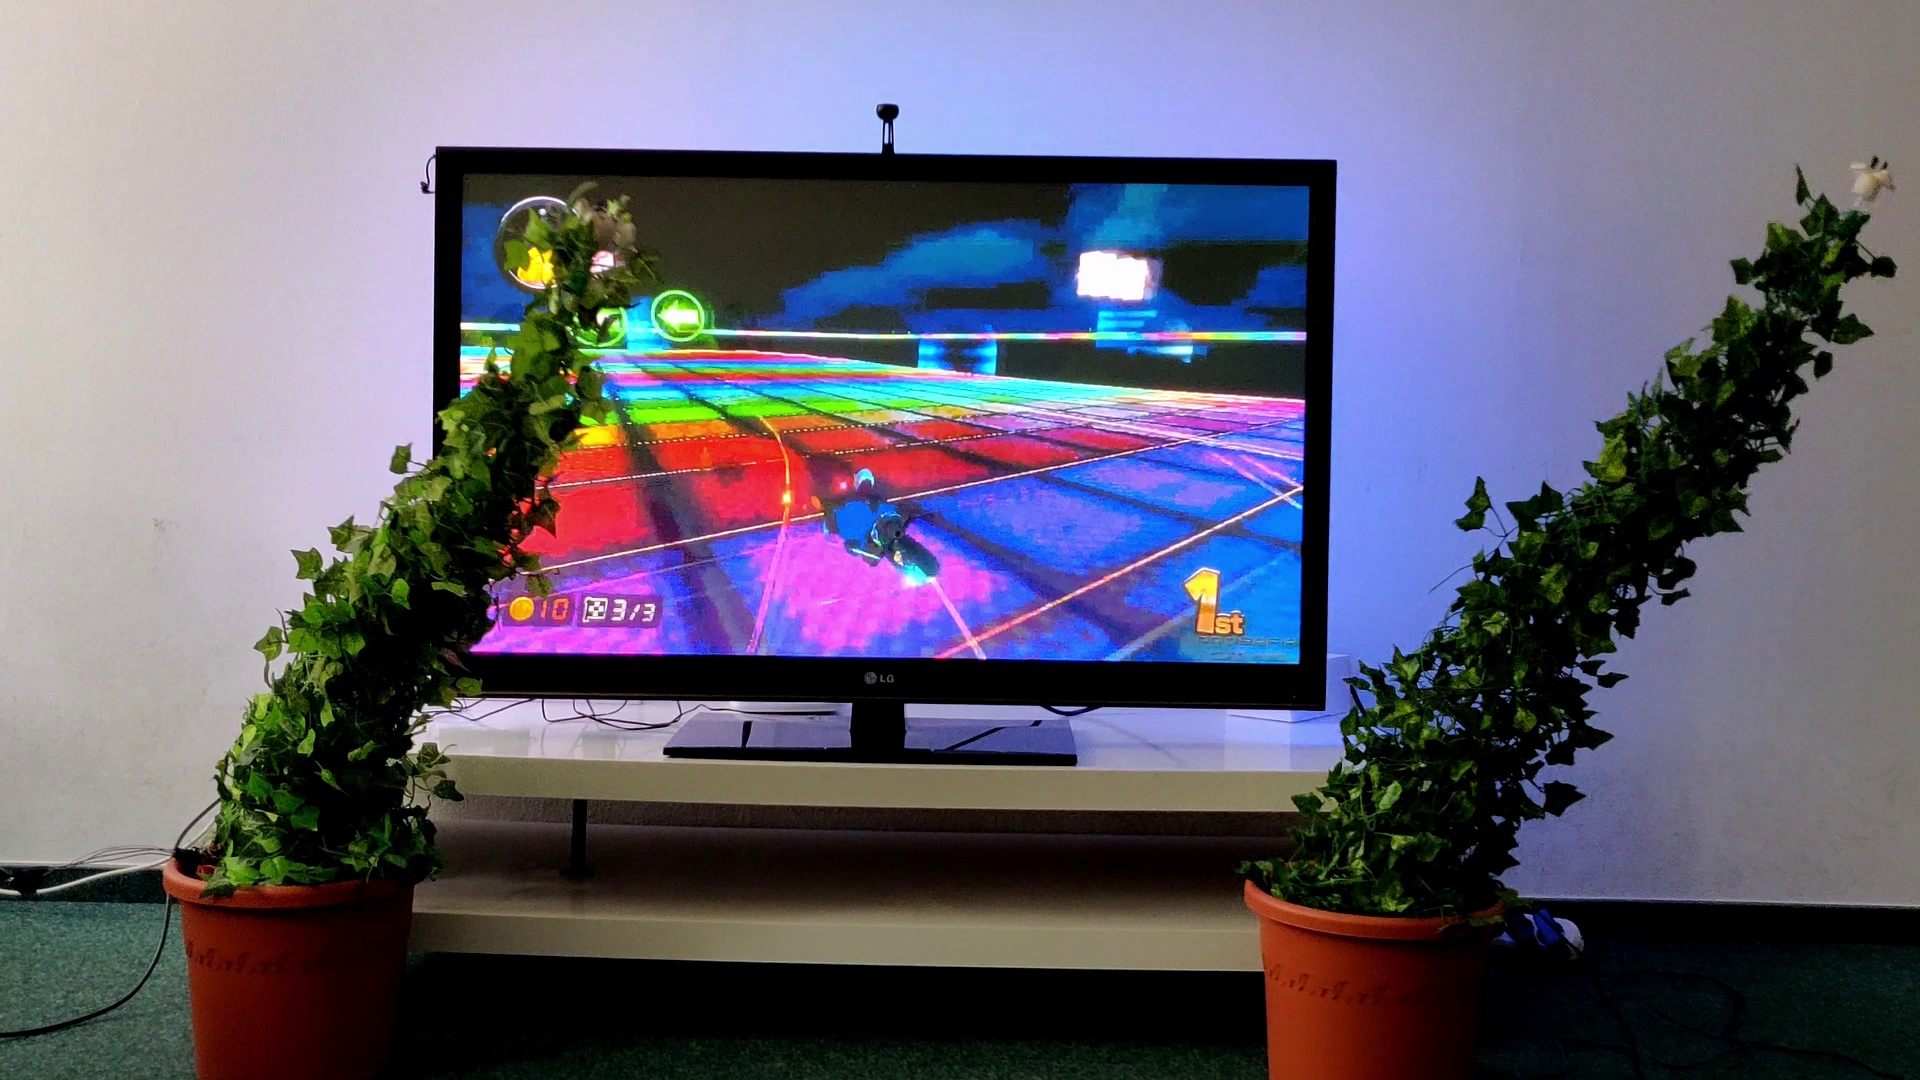 AmbiPlant - Ambient Feedback for Digital Media through Actuated Plants